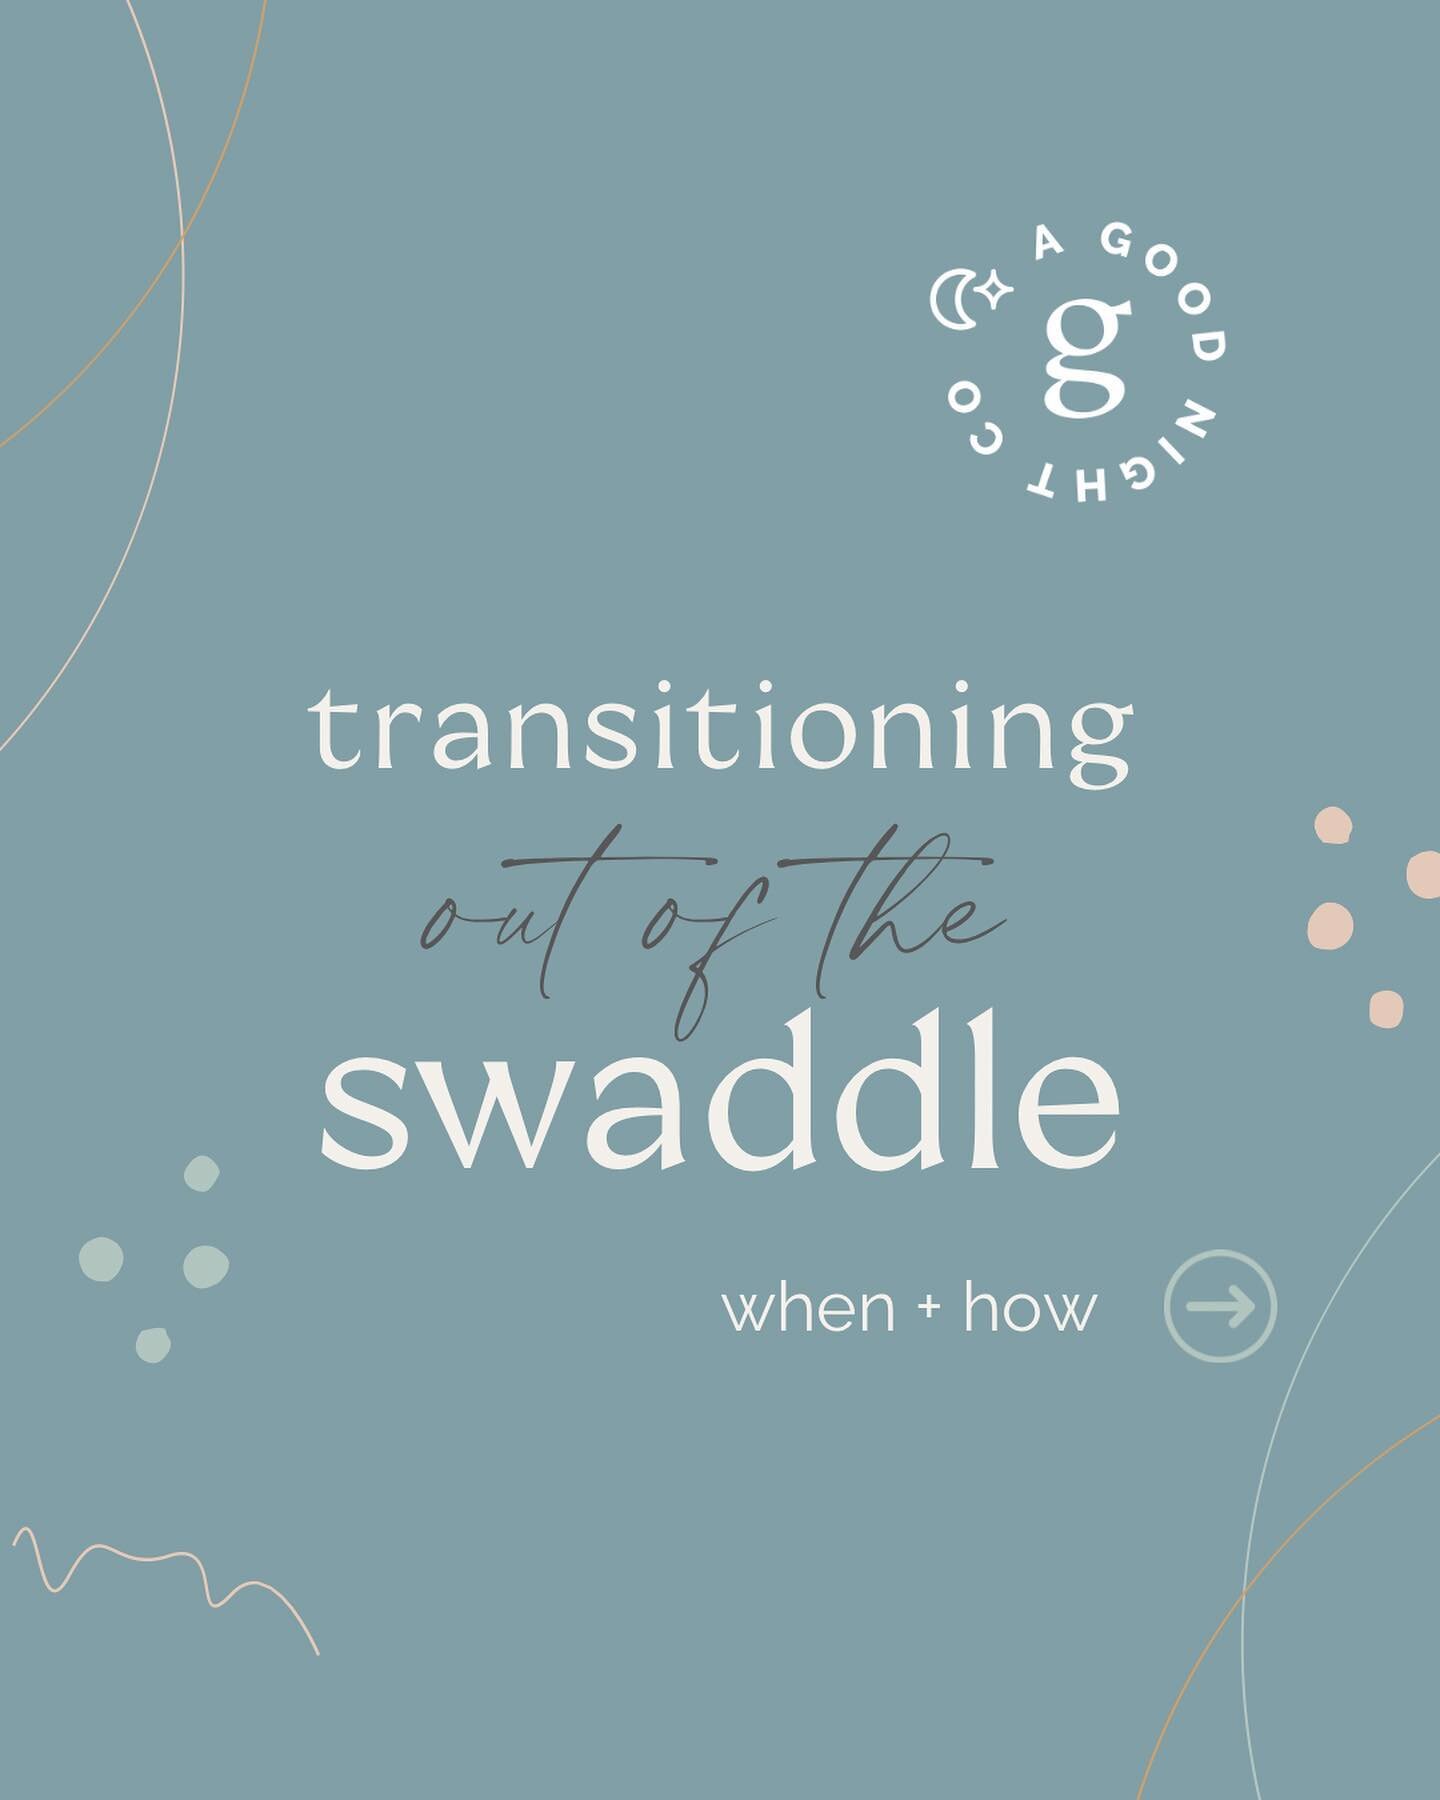 Losing the swaddle can be a super tough transition!

The official recommendation per the Govt. of Canada and the AAP, is to stop swaddling at the first signs of rolling.

More on when &amp; how to stop in the slides!

Swaddling is a personal choice f